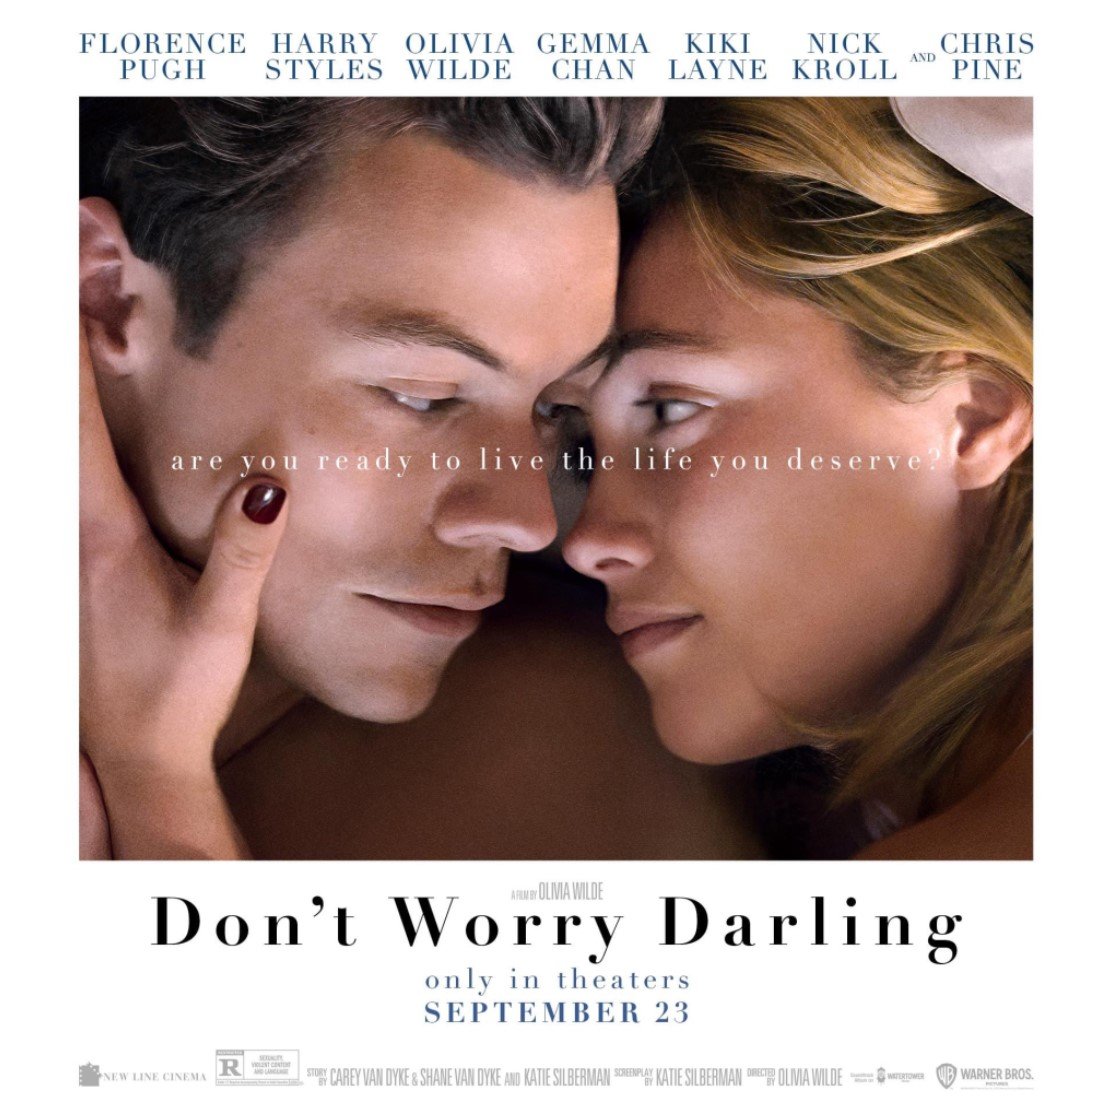 movie review on don't worry darling